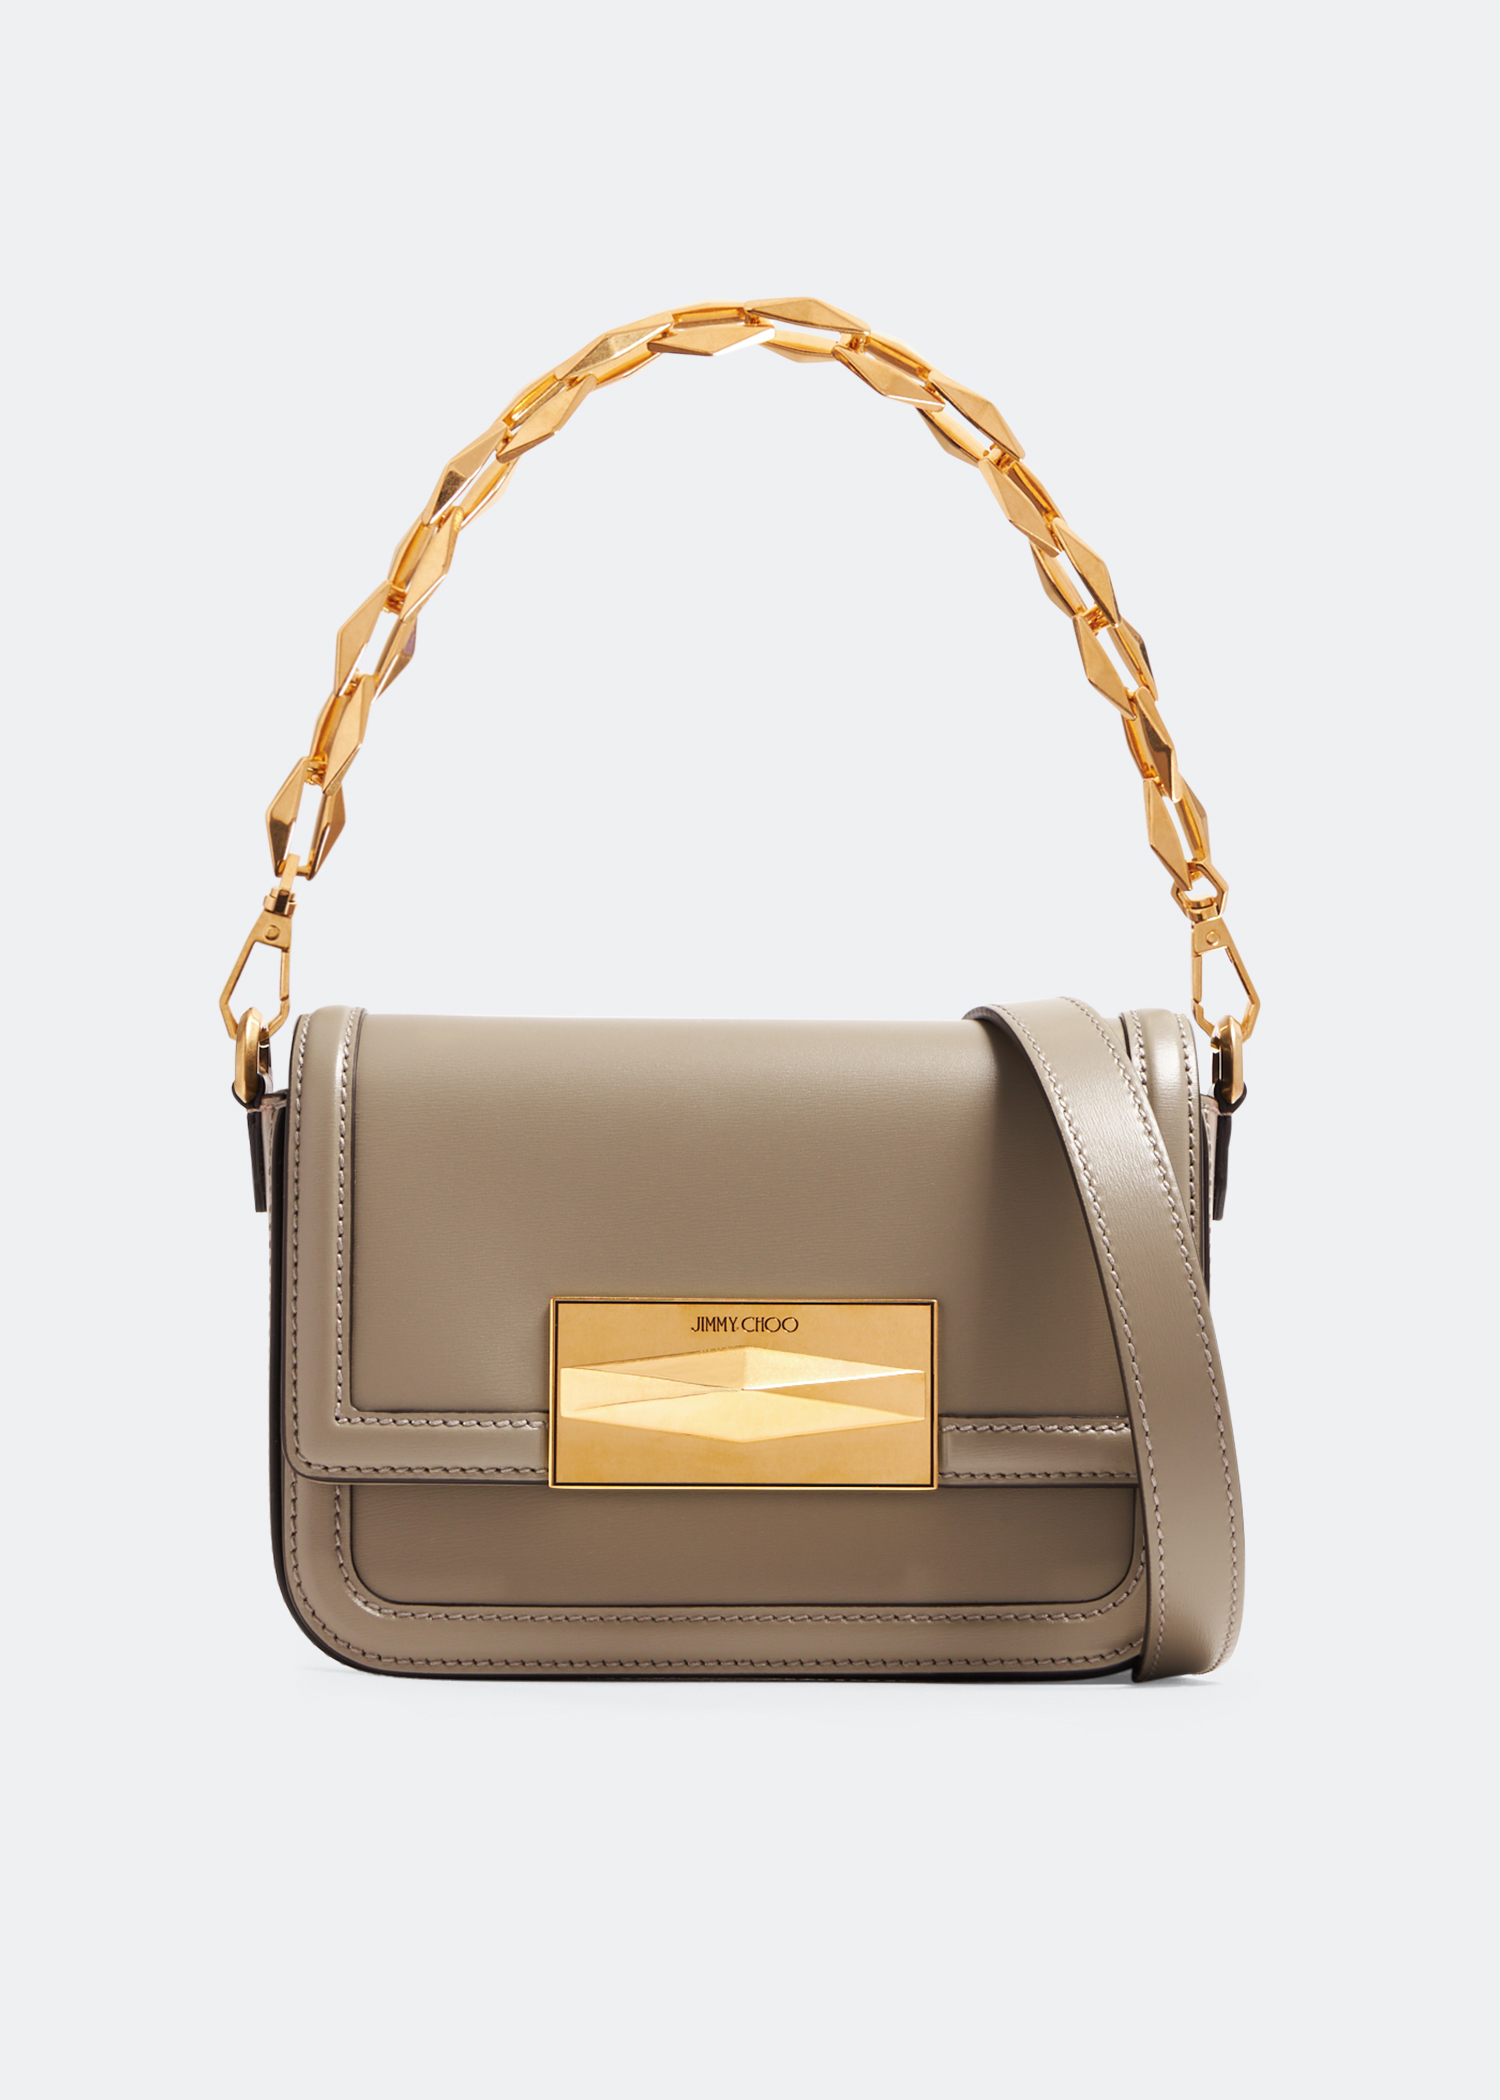 Effortlessly chic and endlessly versatile, The Dauphine lives on